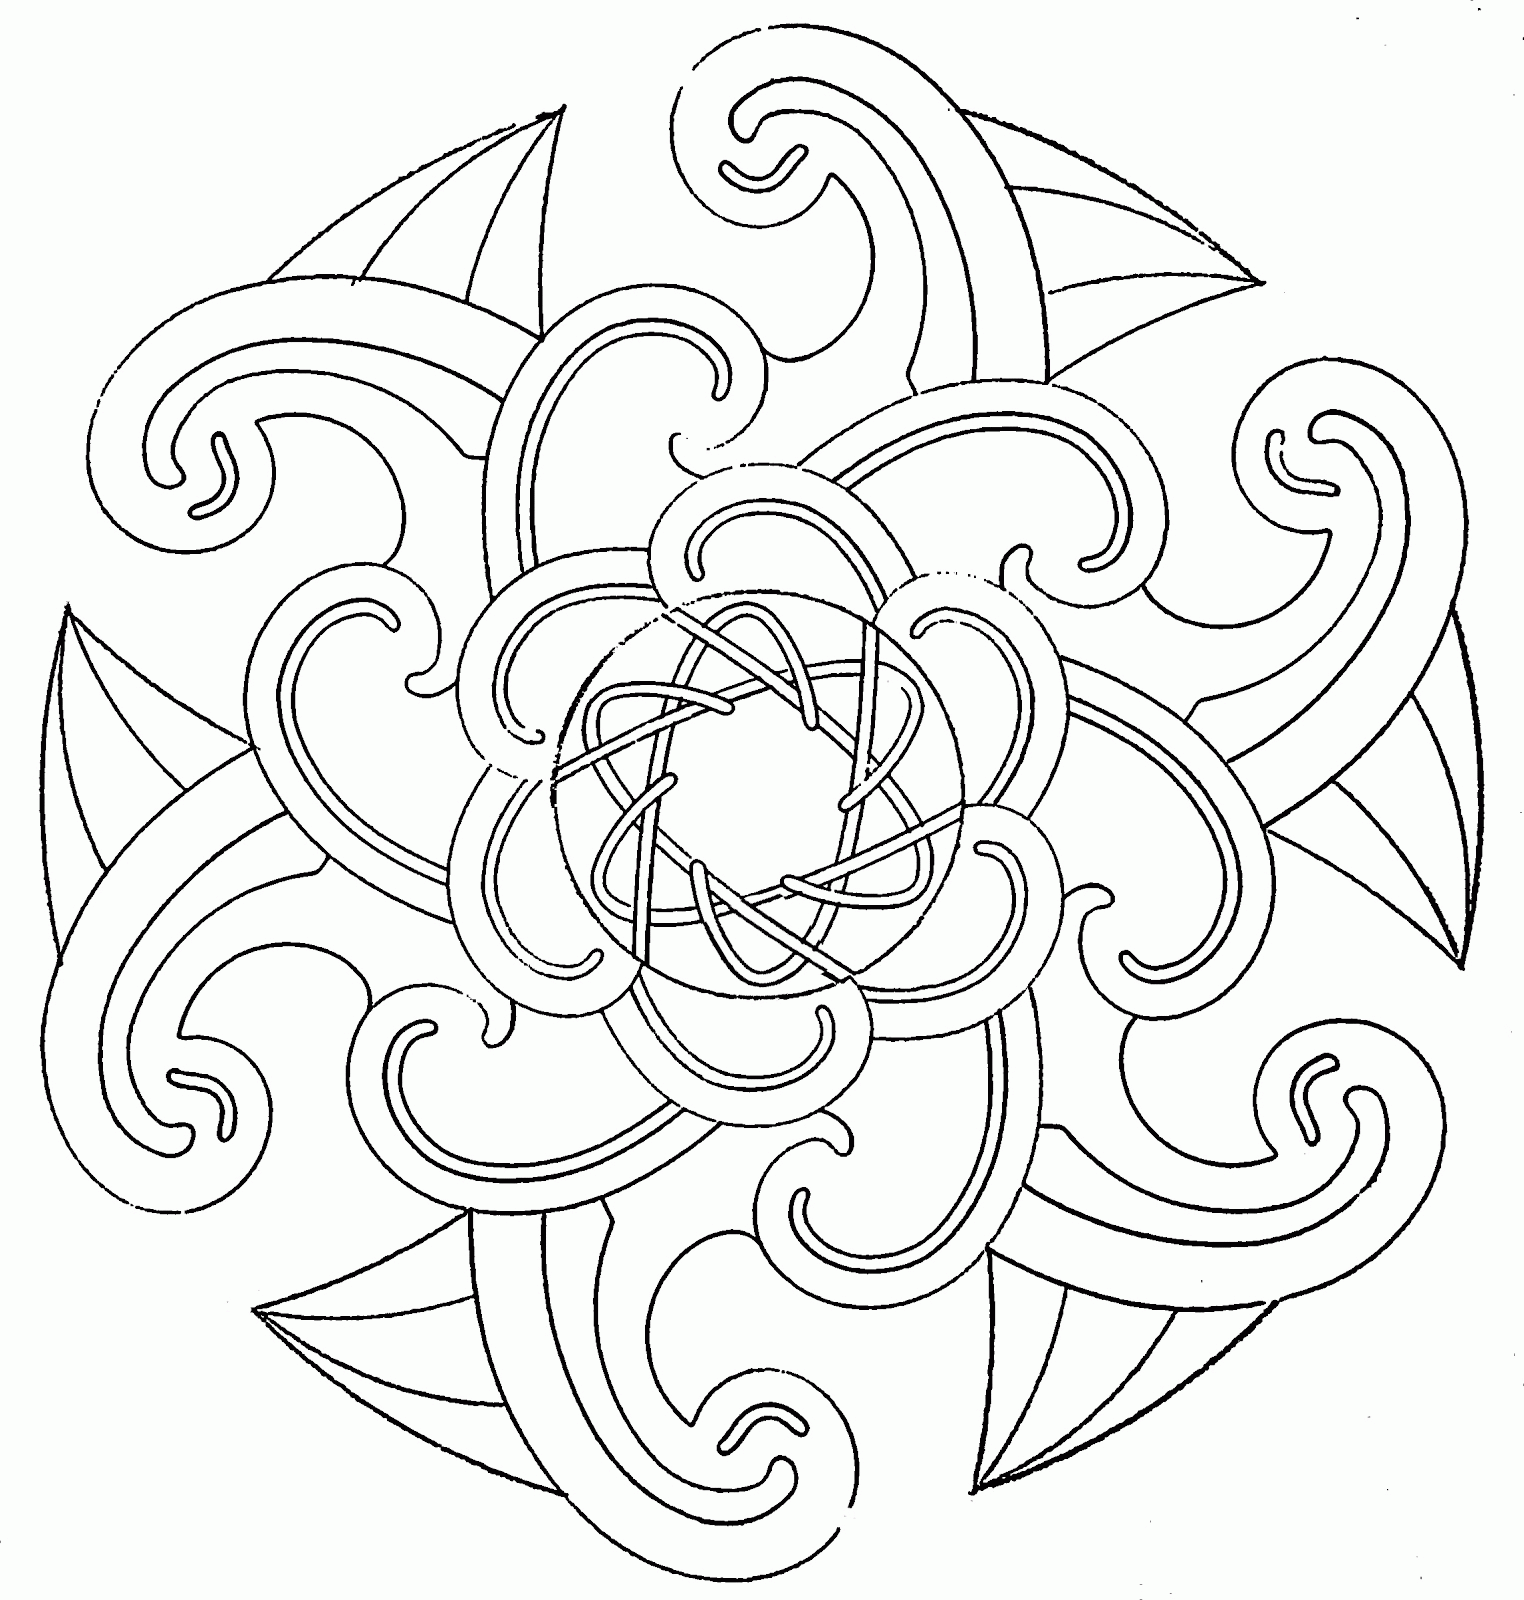 coloring pages of cool designs cool designs to color coloring pages coloring home coloring designs cool of pages 